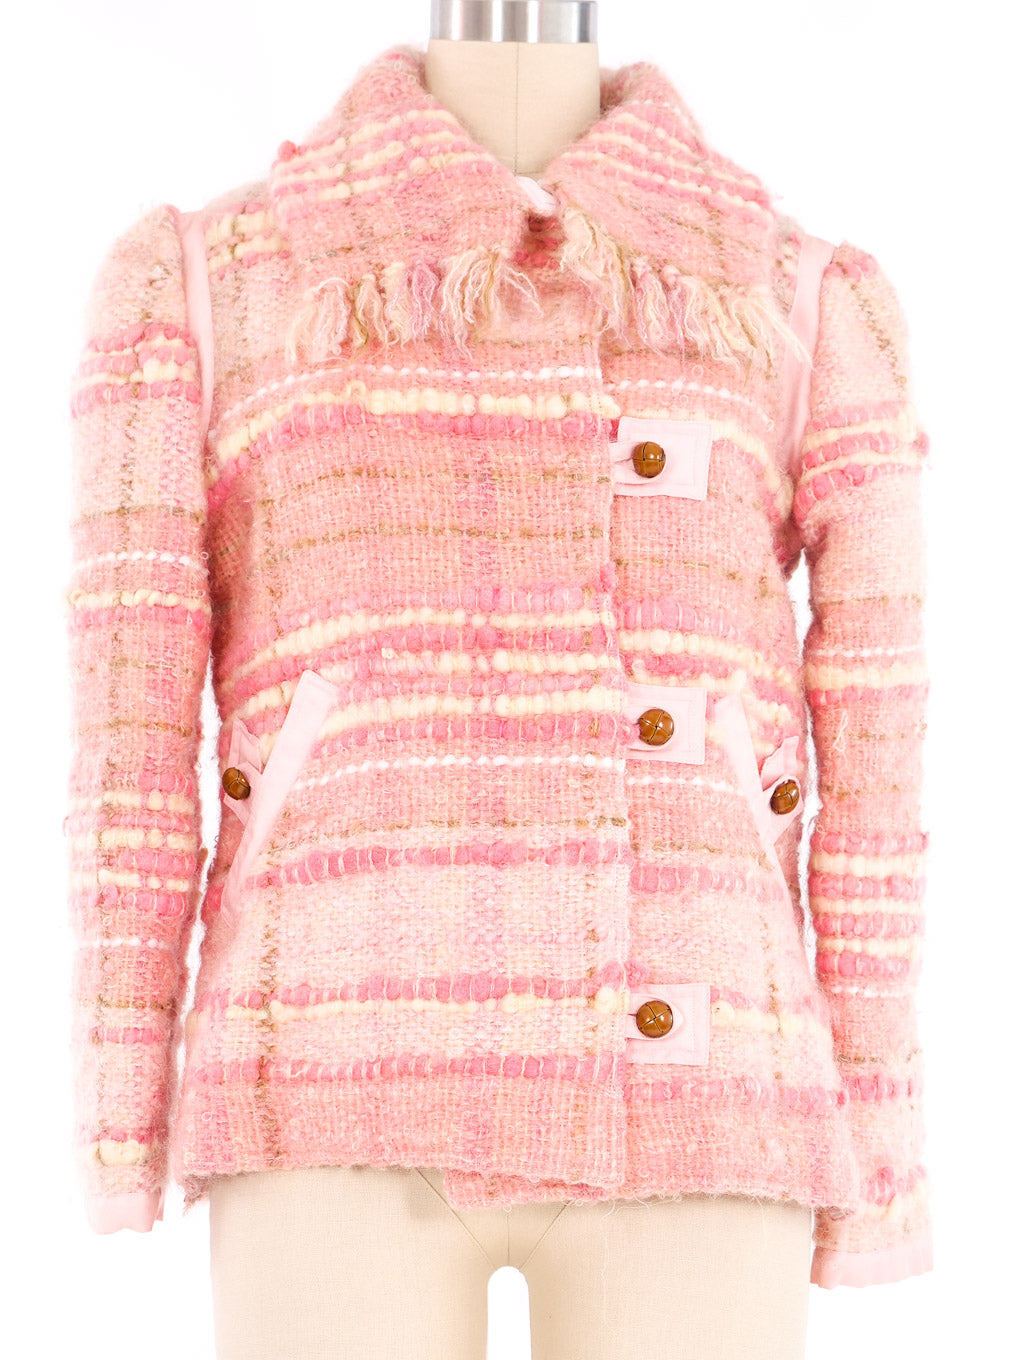 NEW/FOUND 1960s Courreges Pink Mohair Tweed Jacket